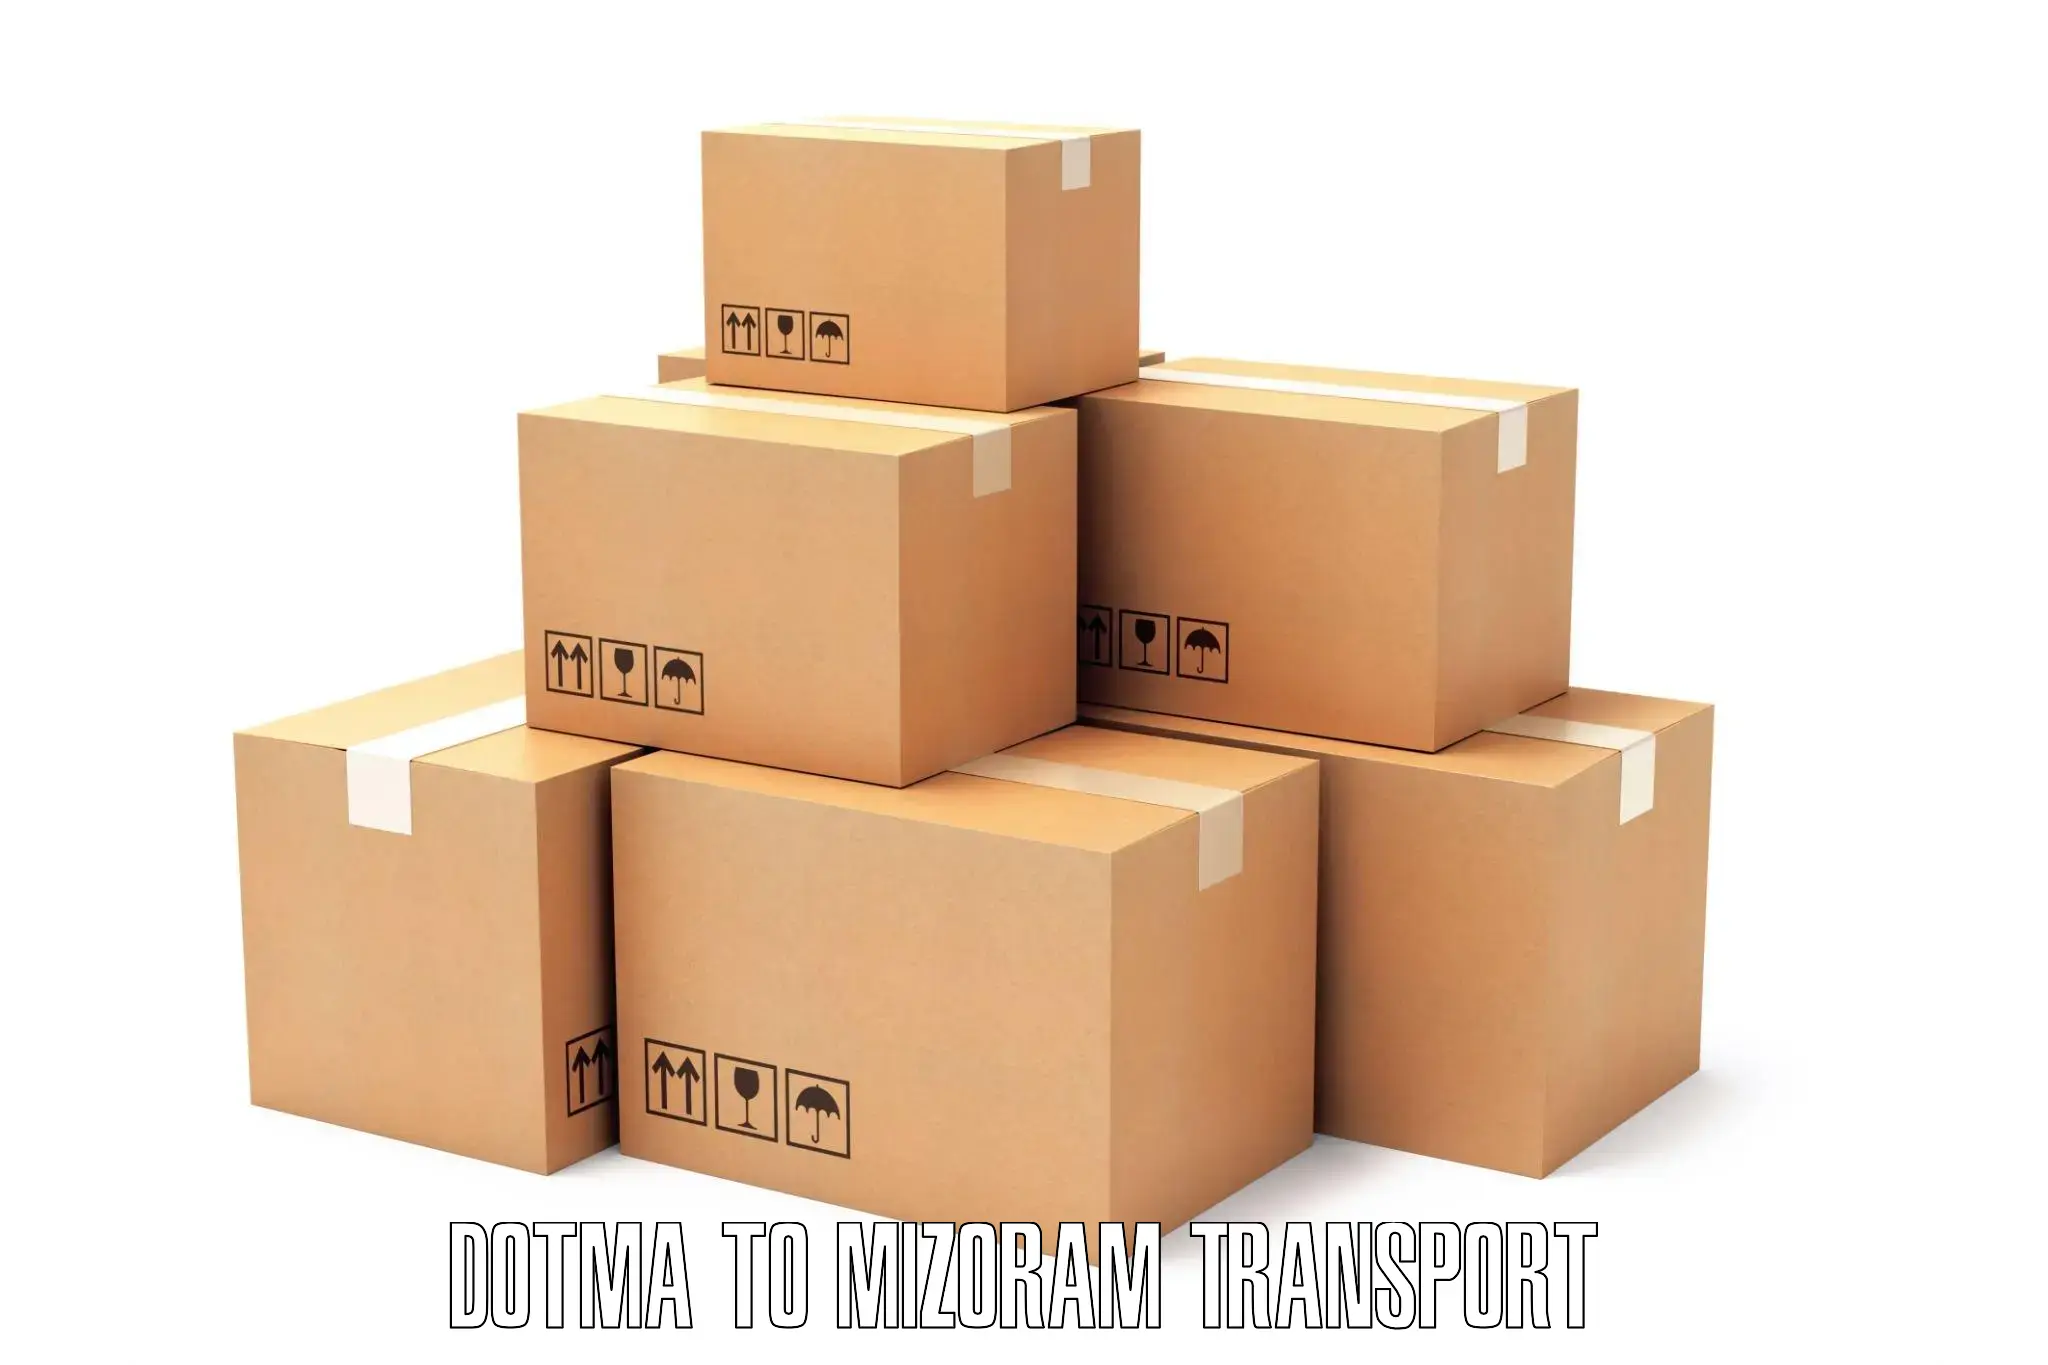 Goods delivery service in Dotma to Mamit